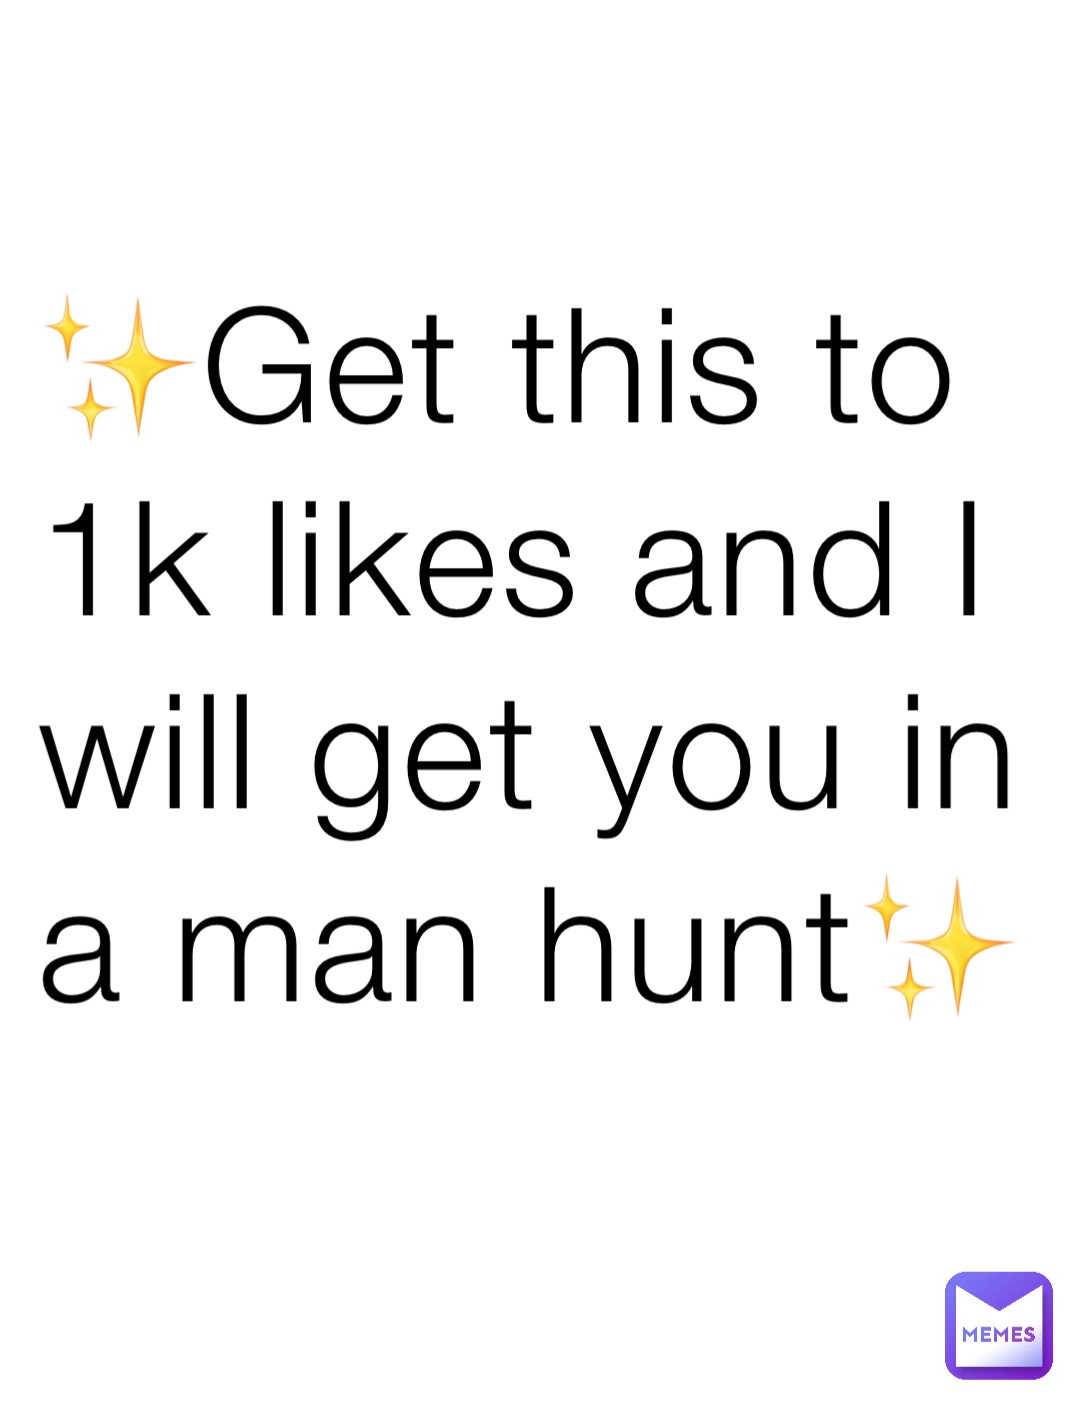 ✨Get this to 1k likes and I will get you in a man hunt✨